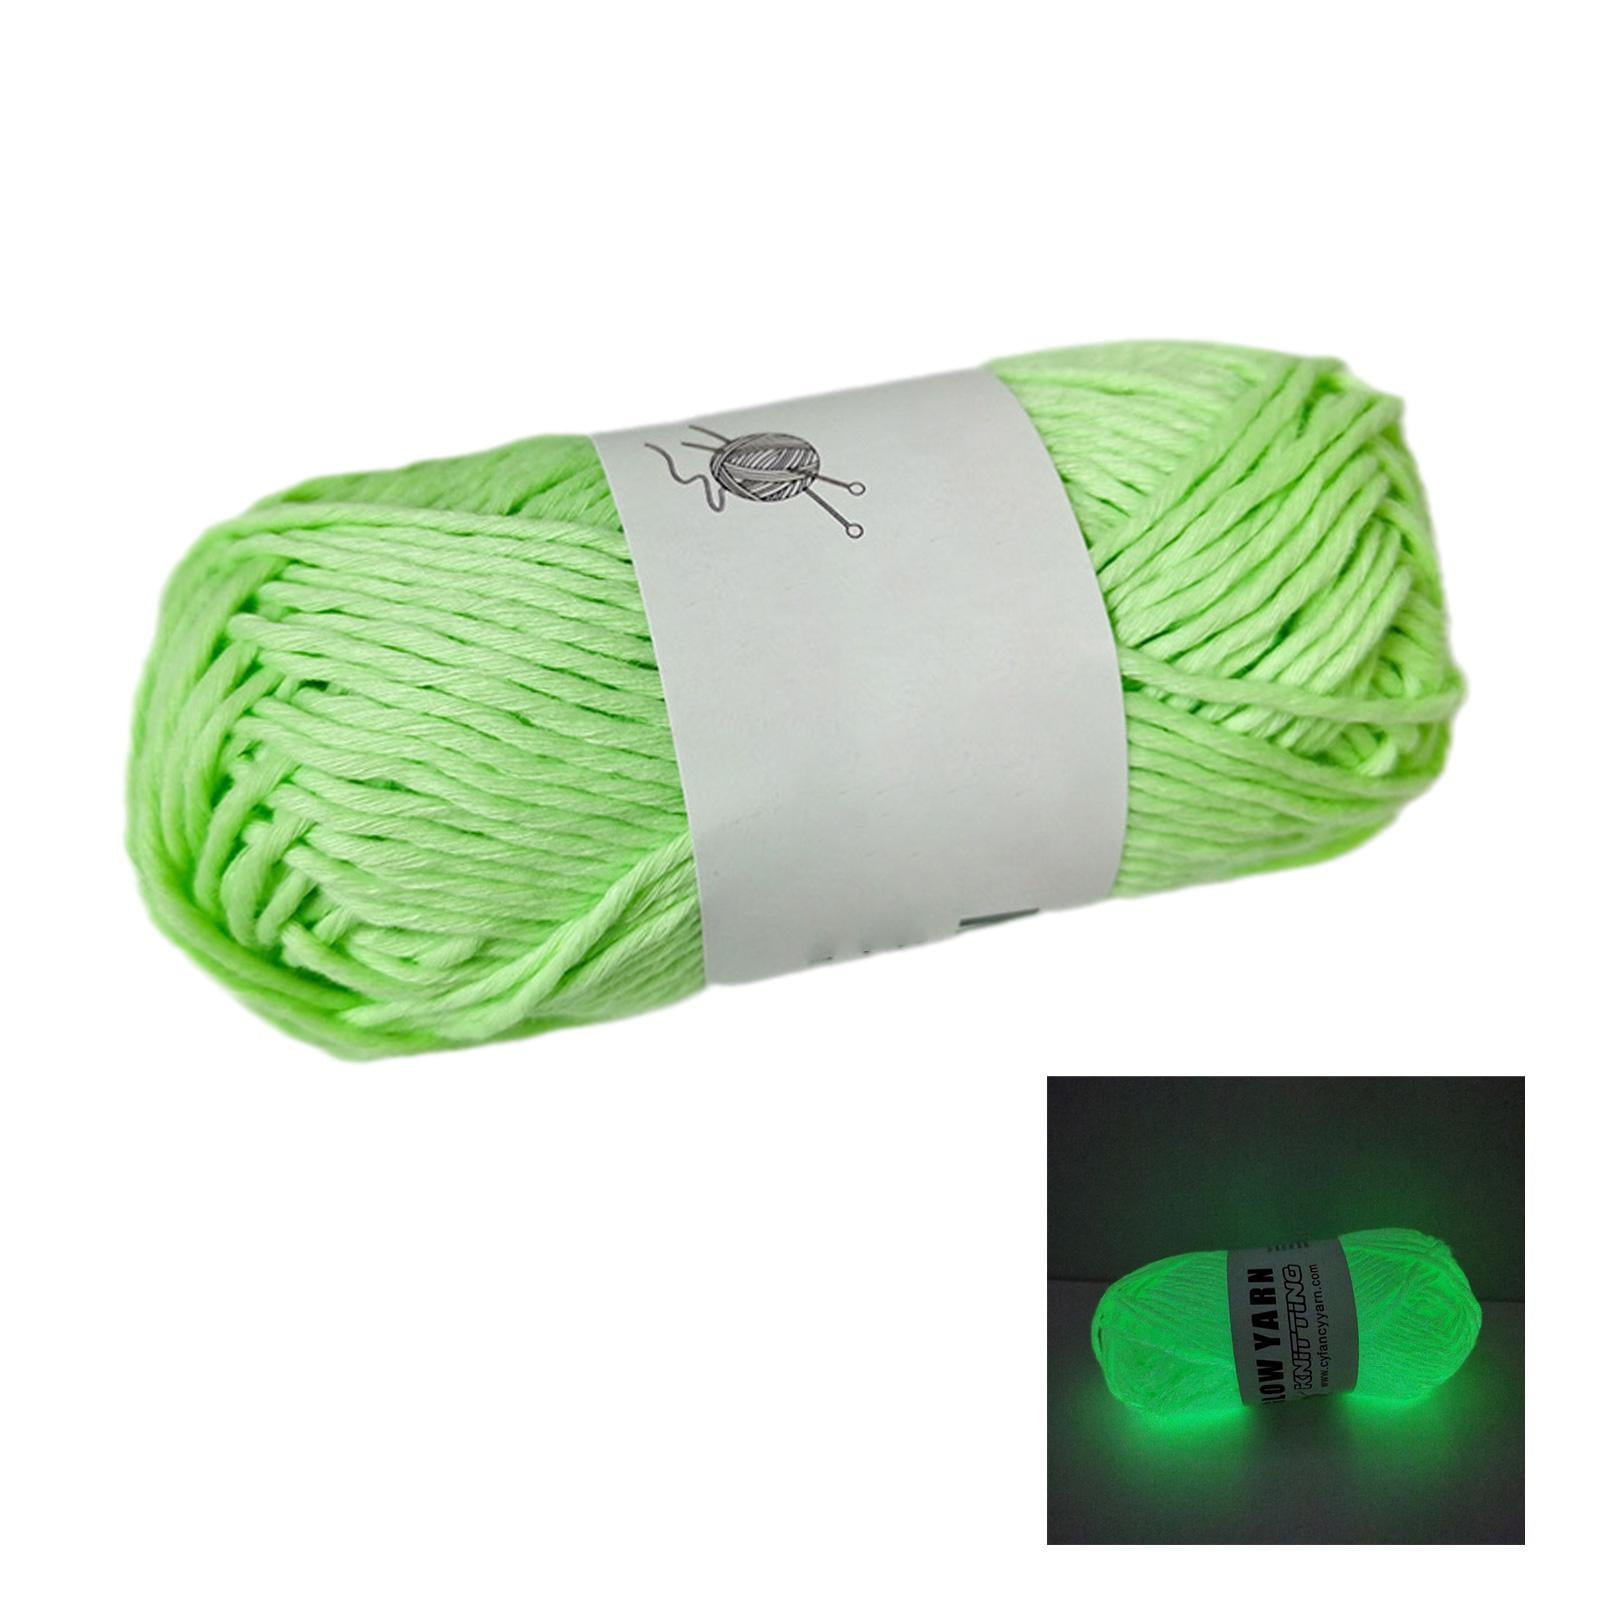 10 Pack Glow in The Dark Yarn for Crochet - 55 Yards for Crochet DIY Glow Yarn Luminous Knitting Crochet Yarn Kit with 2 Crochet Hooks for Arts